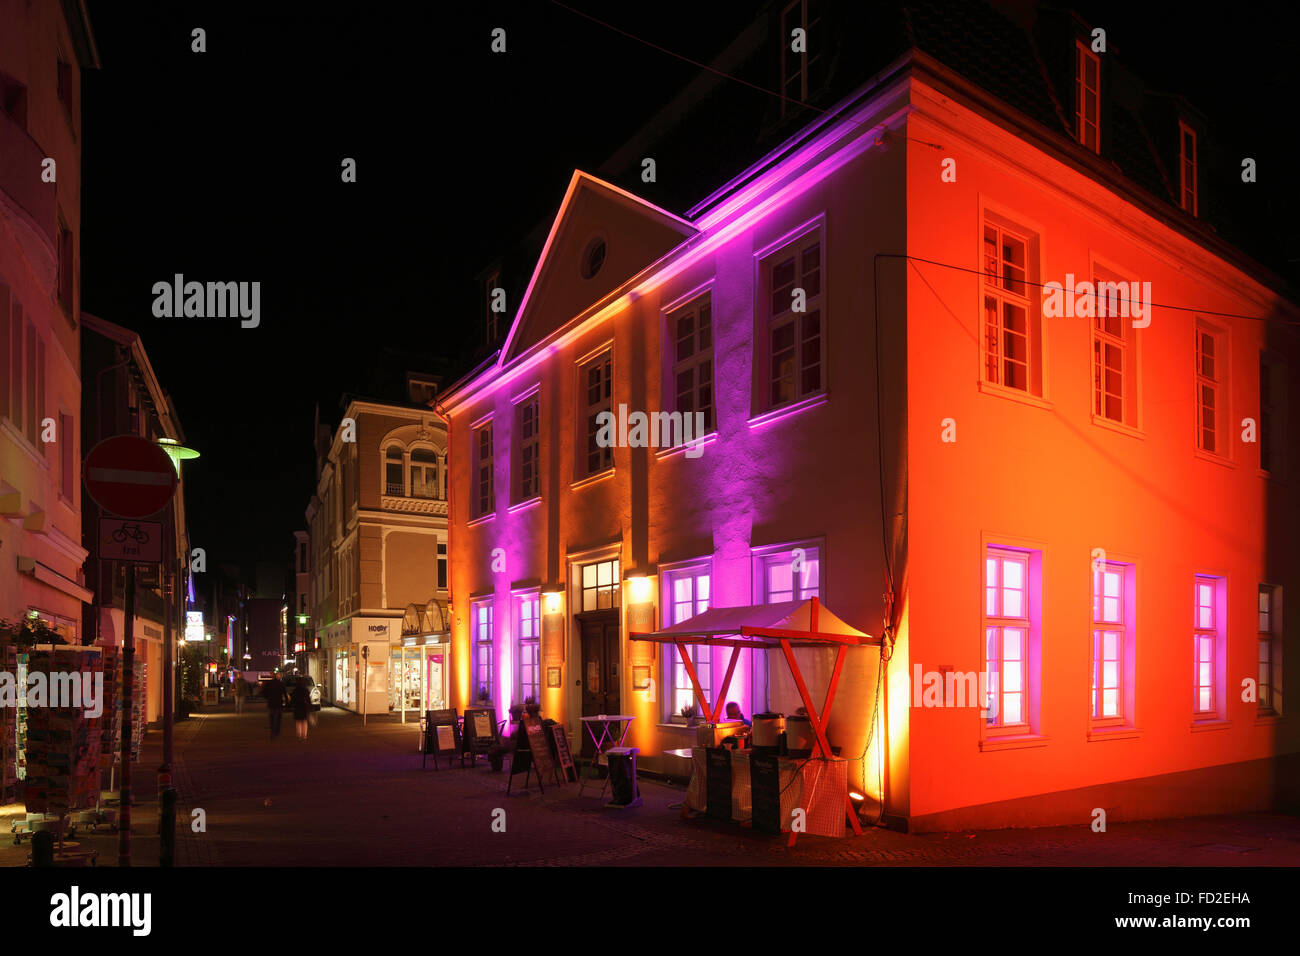 D-Recklinghausen, Ruhr area, Westphalia, North Rhine-Westphalia, NRW, 'Recklinghausen leuchtet', festival illumination in the historic downtown, Linen Weaver House Wueller in the Grosse Geldstrasse, residential building, classicism Stock Photo